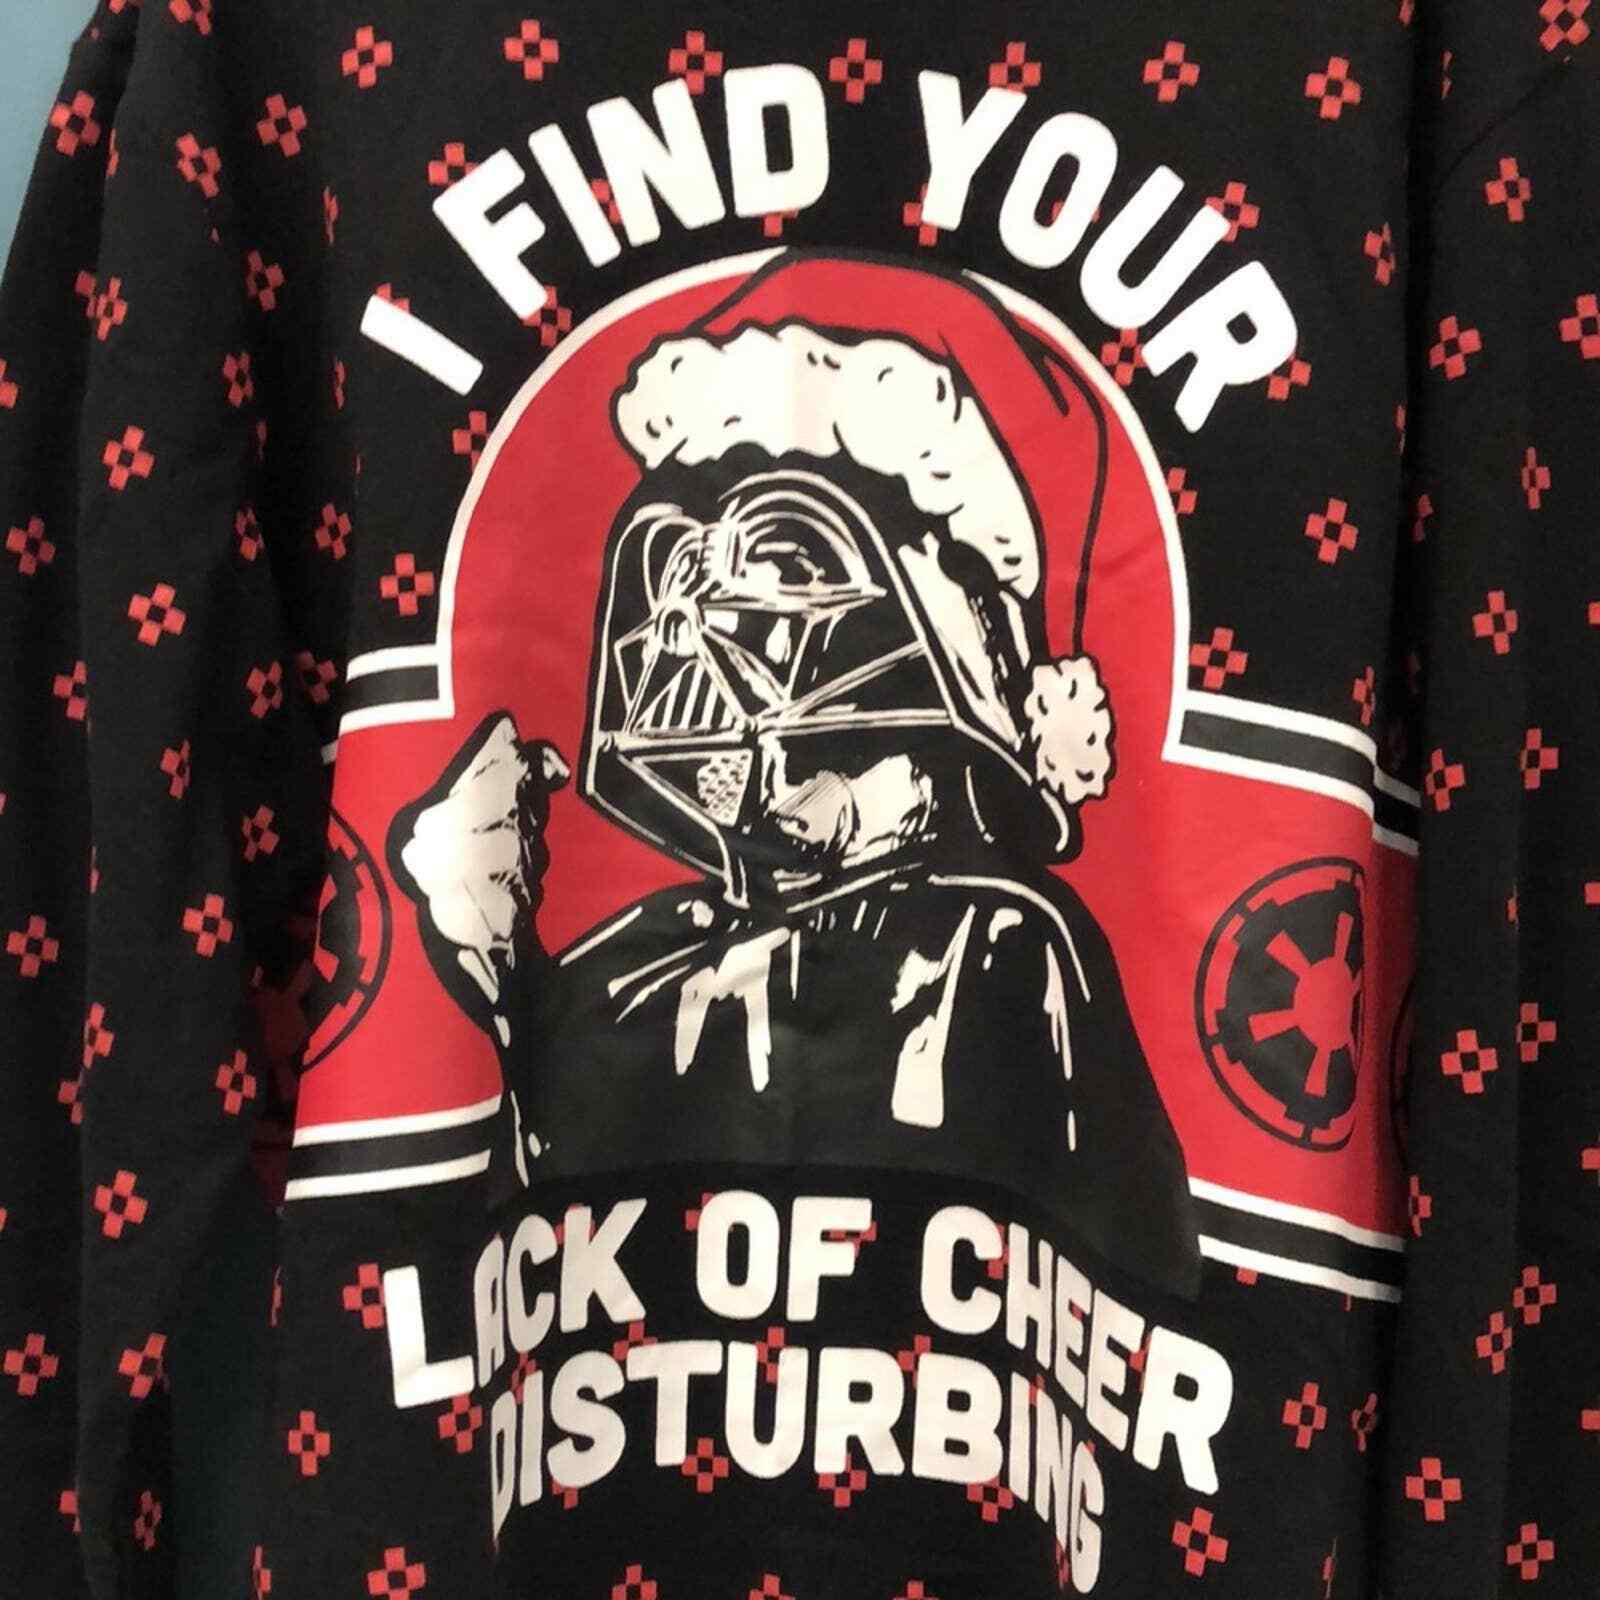 Primary image for Star Wars Darth Vader Christmas Sweatshirt mens size XXL Black, Red & White New